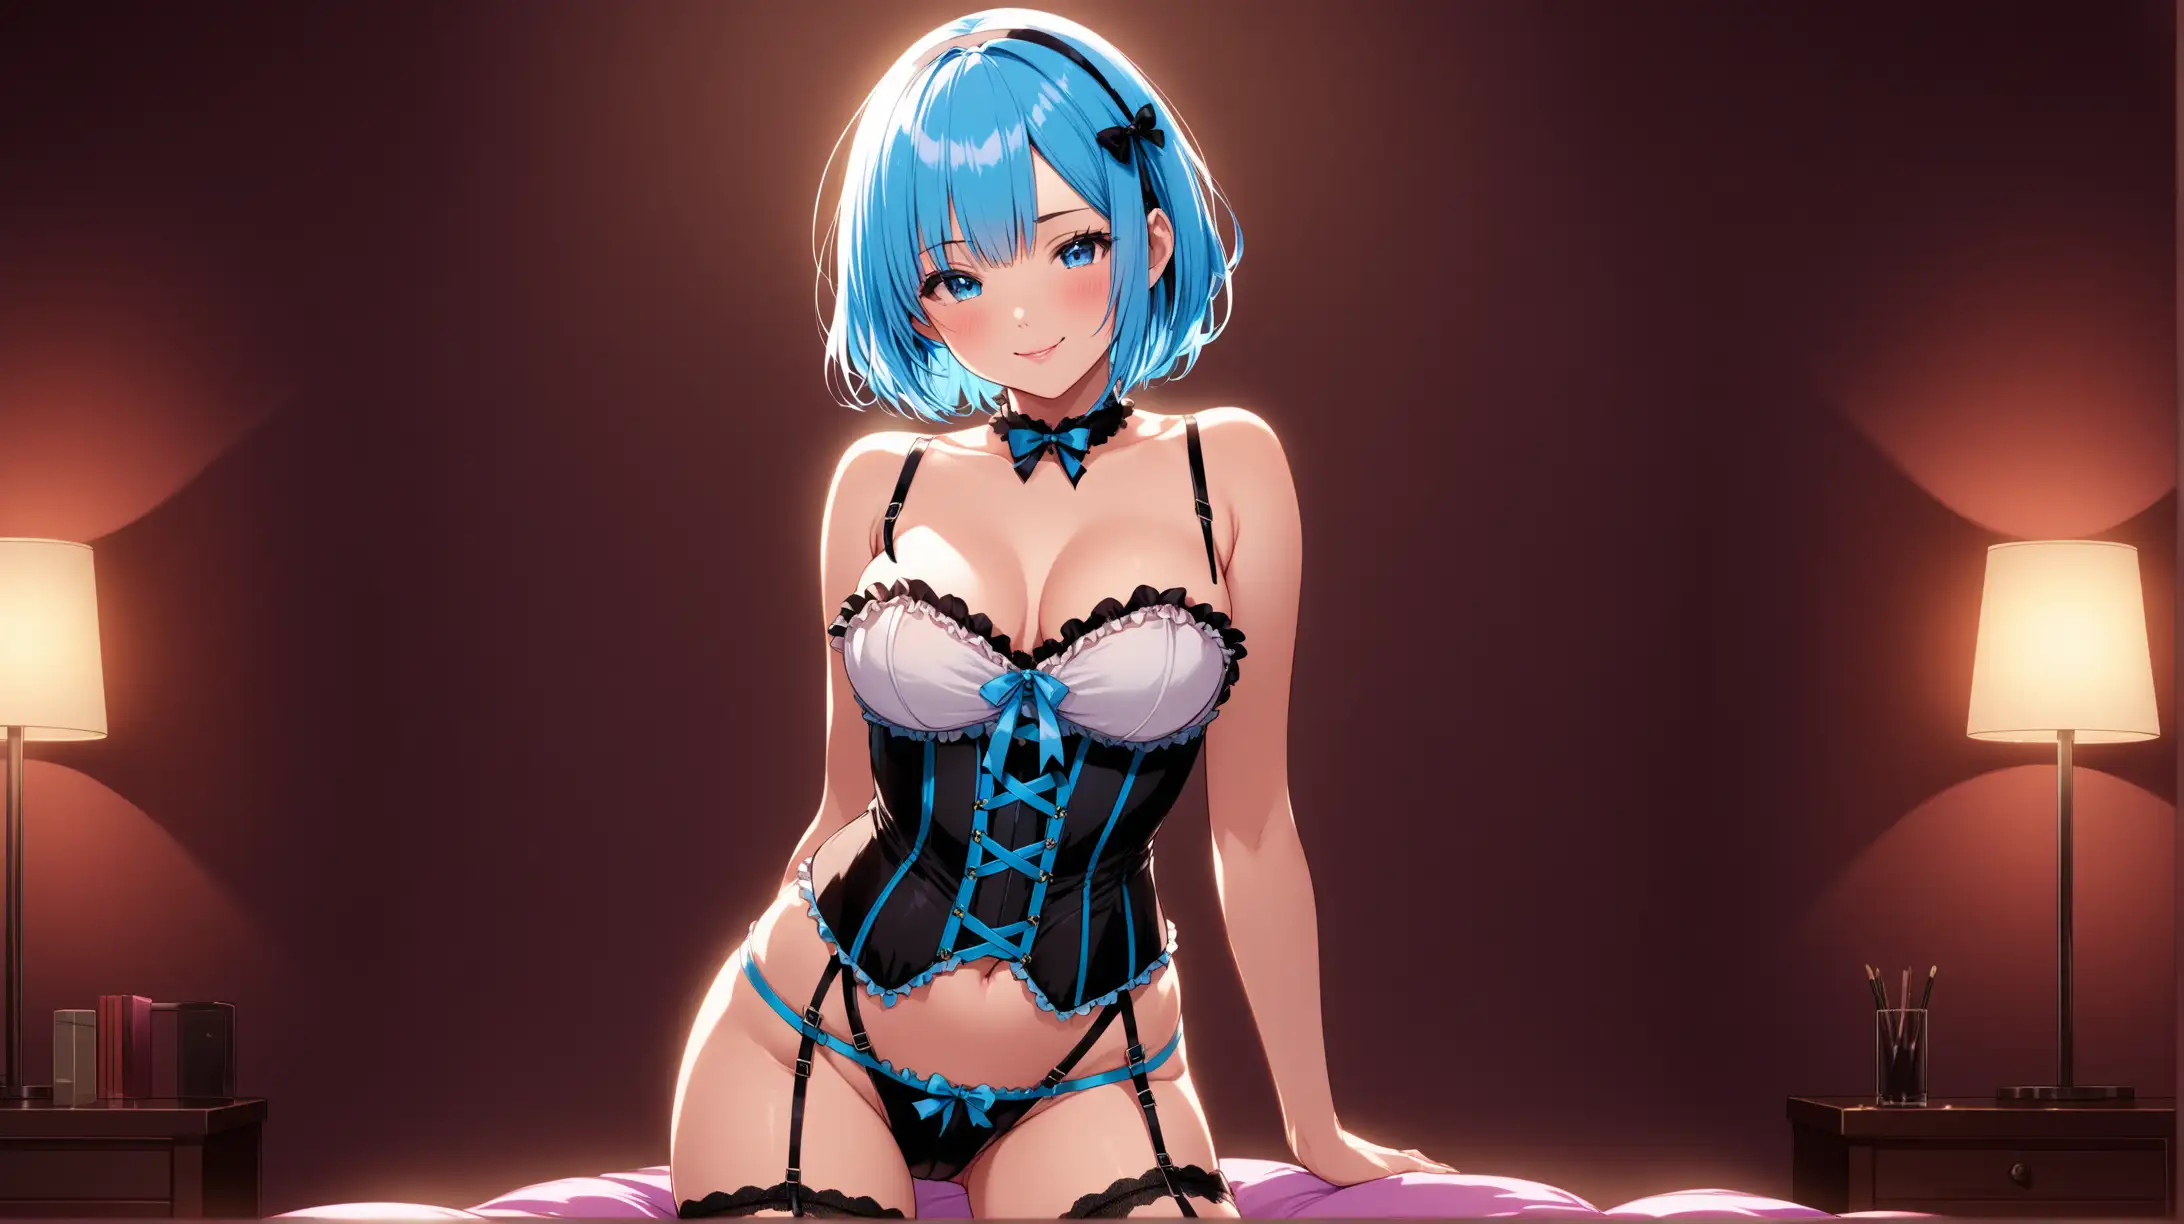 Draw the character Rem, high quality, ambient lighting, long shot, indoors, seductive pose, colorful corset and garter straps, erotic, smiling at the viewer